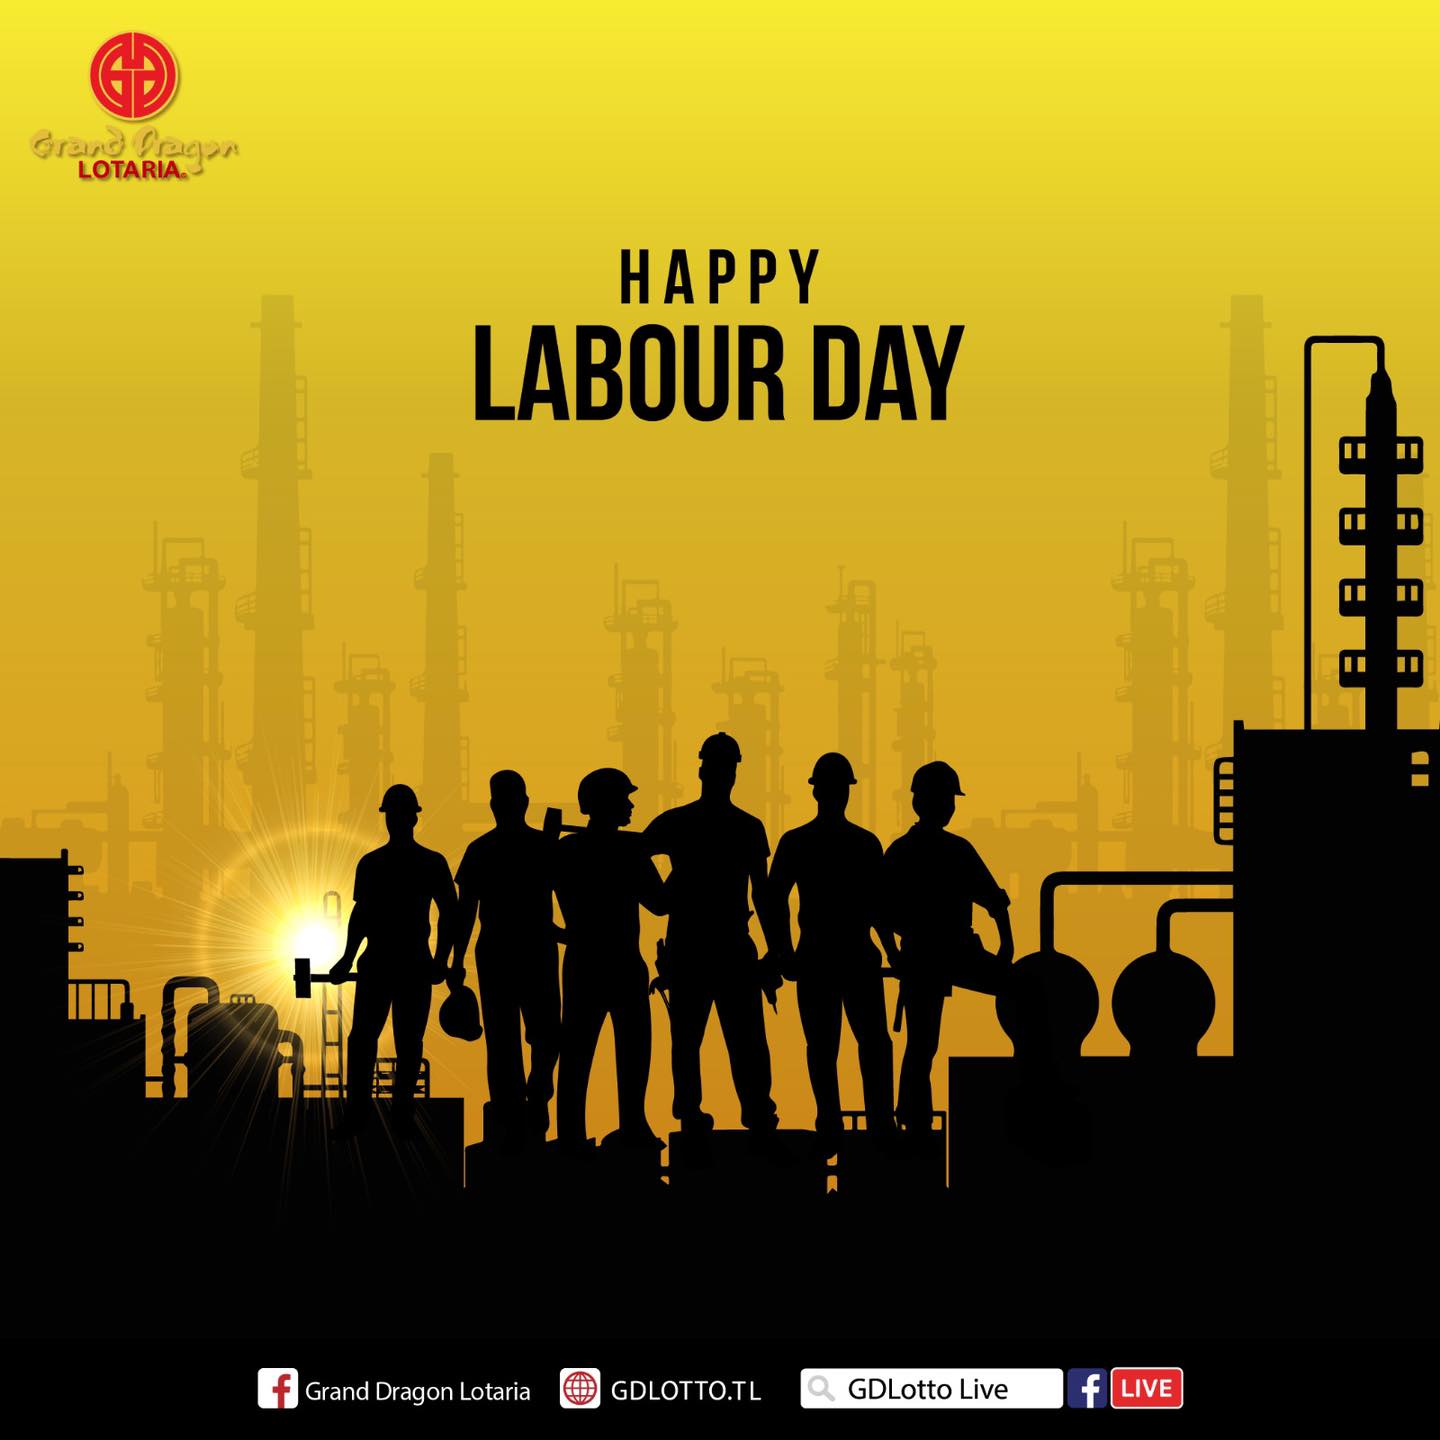 Wishing all Happy Labour Day